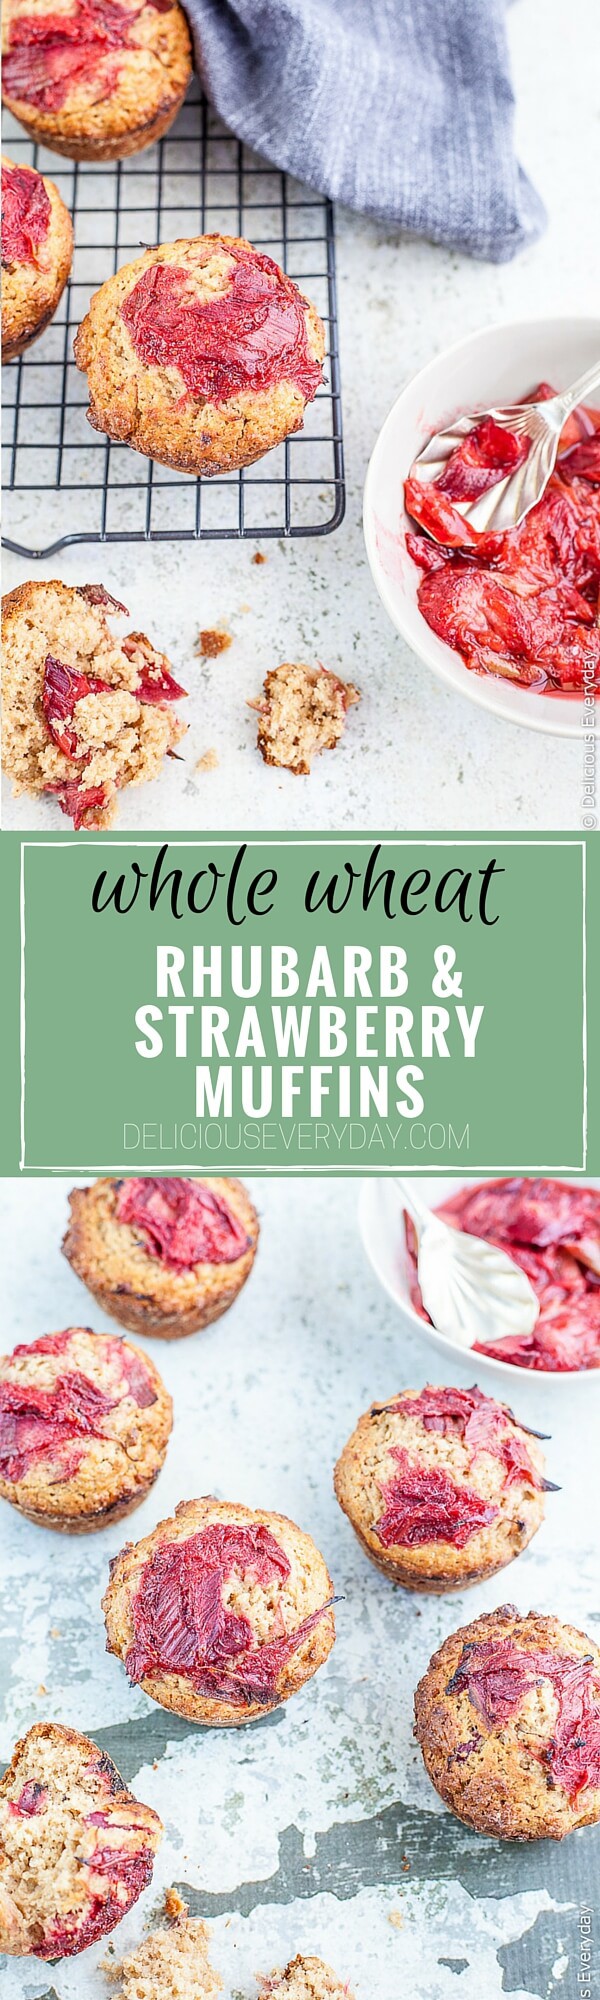 Rhubarb and Strawberry Whole Wheat Muffins - delicious roasted strawberries and rhubarb come together with whole wheat spelt flour and a rhubarb and strawberry compote for a decadent weekend breakfast. Freshly baked muffins for breakfast. Yes please!